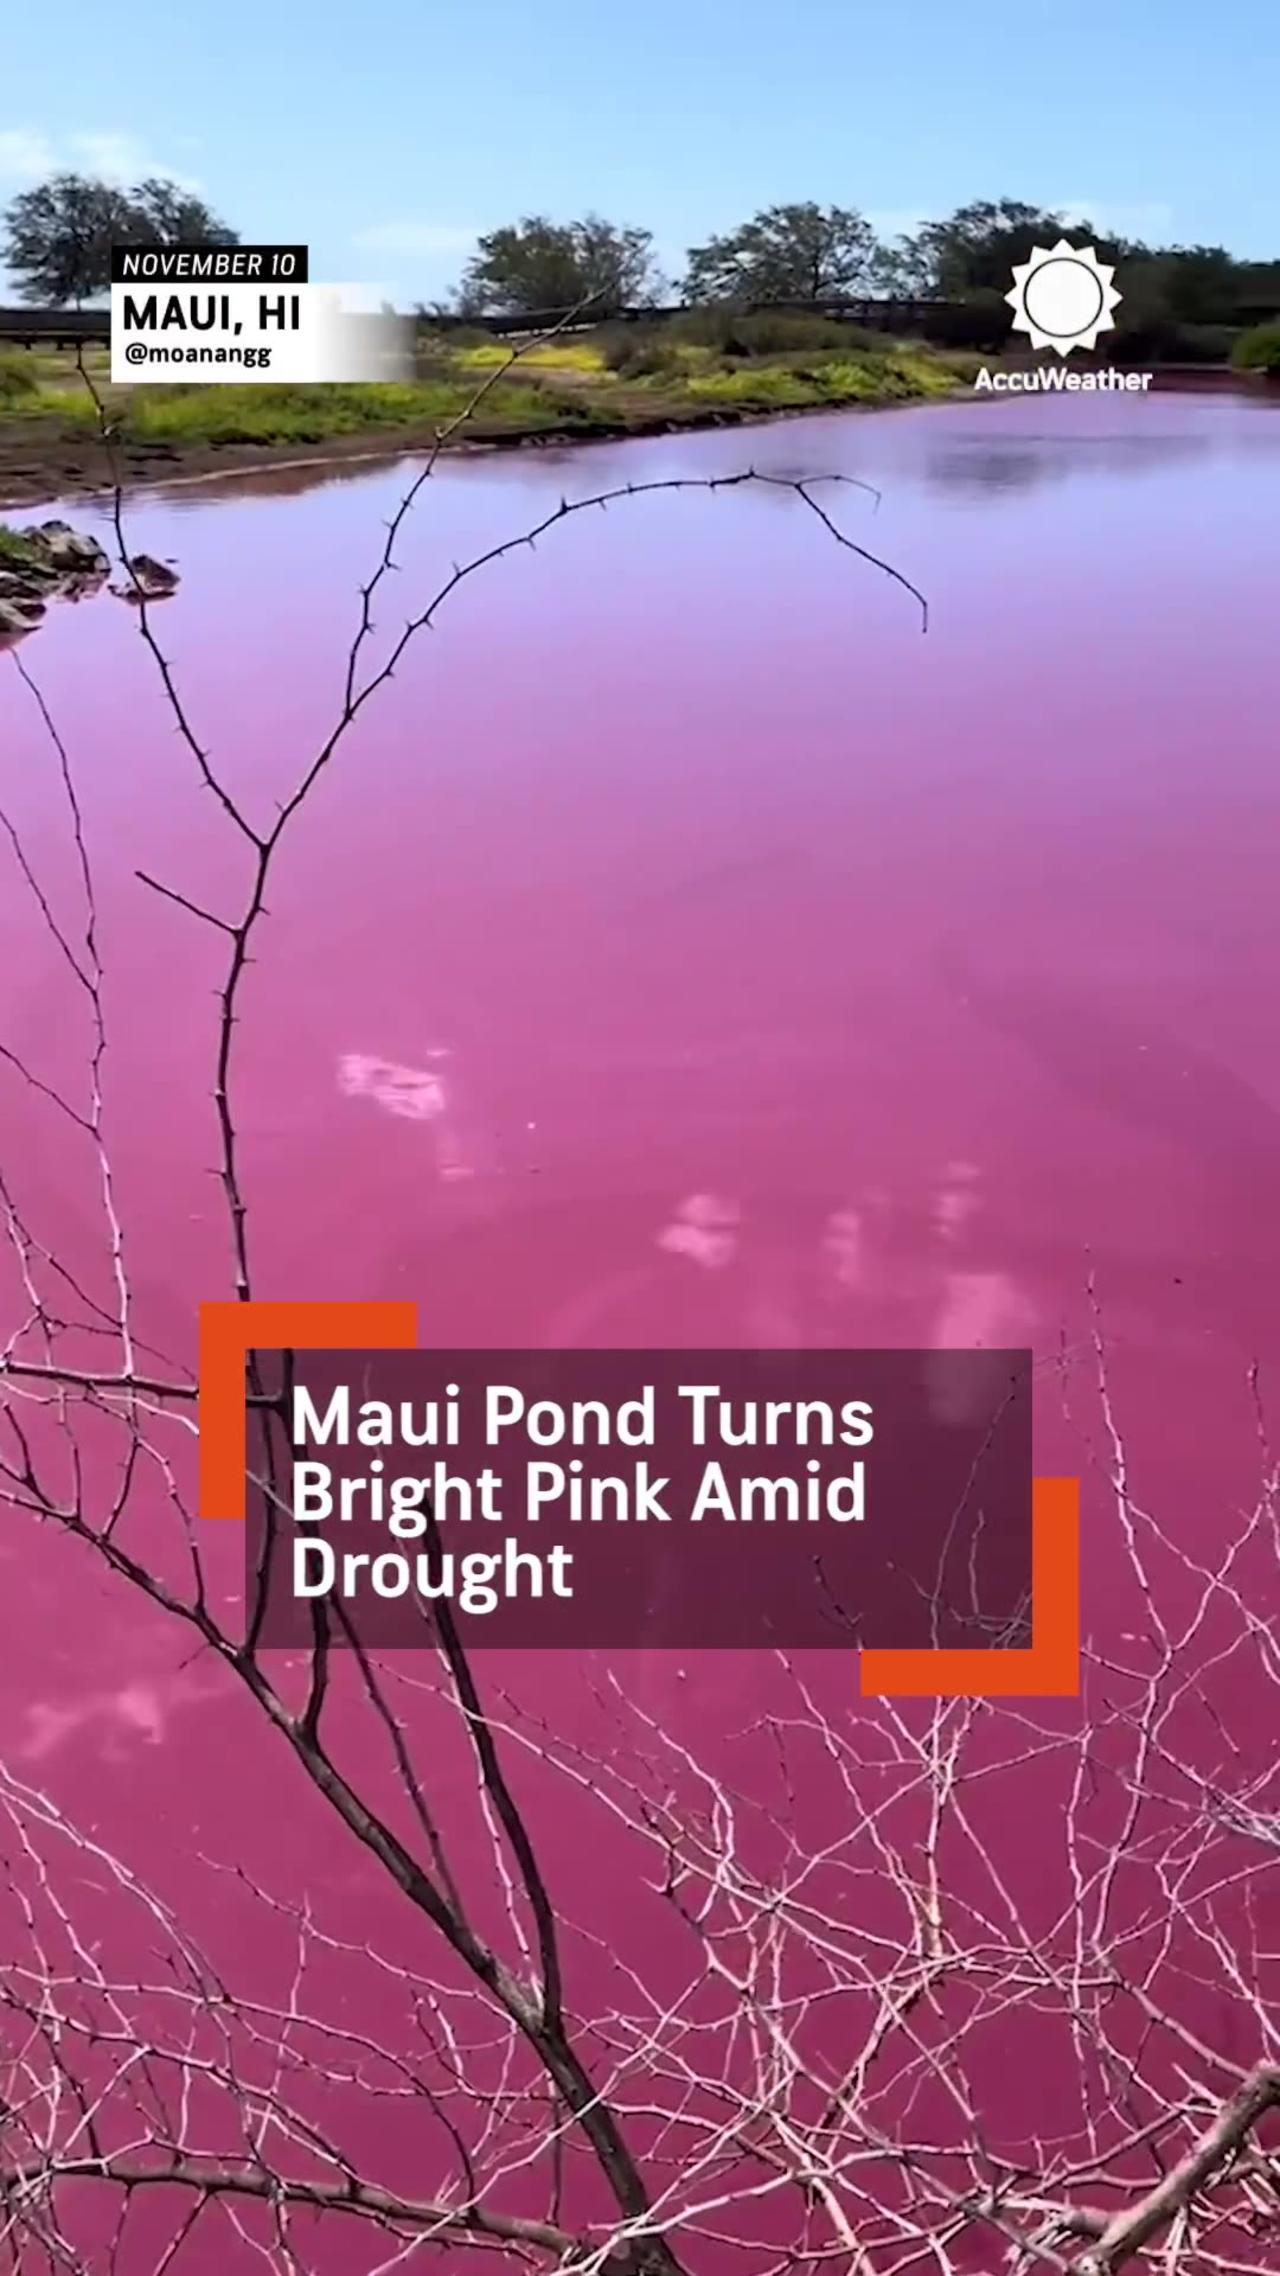 MAUI POND TURNS BRIGHT PINK AMID DROUGHT